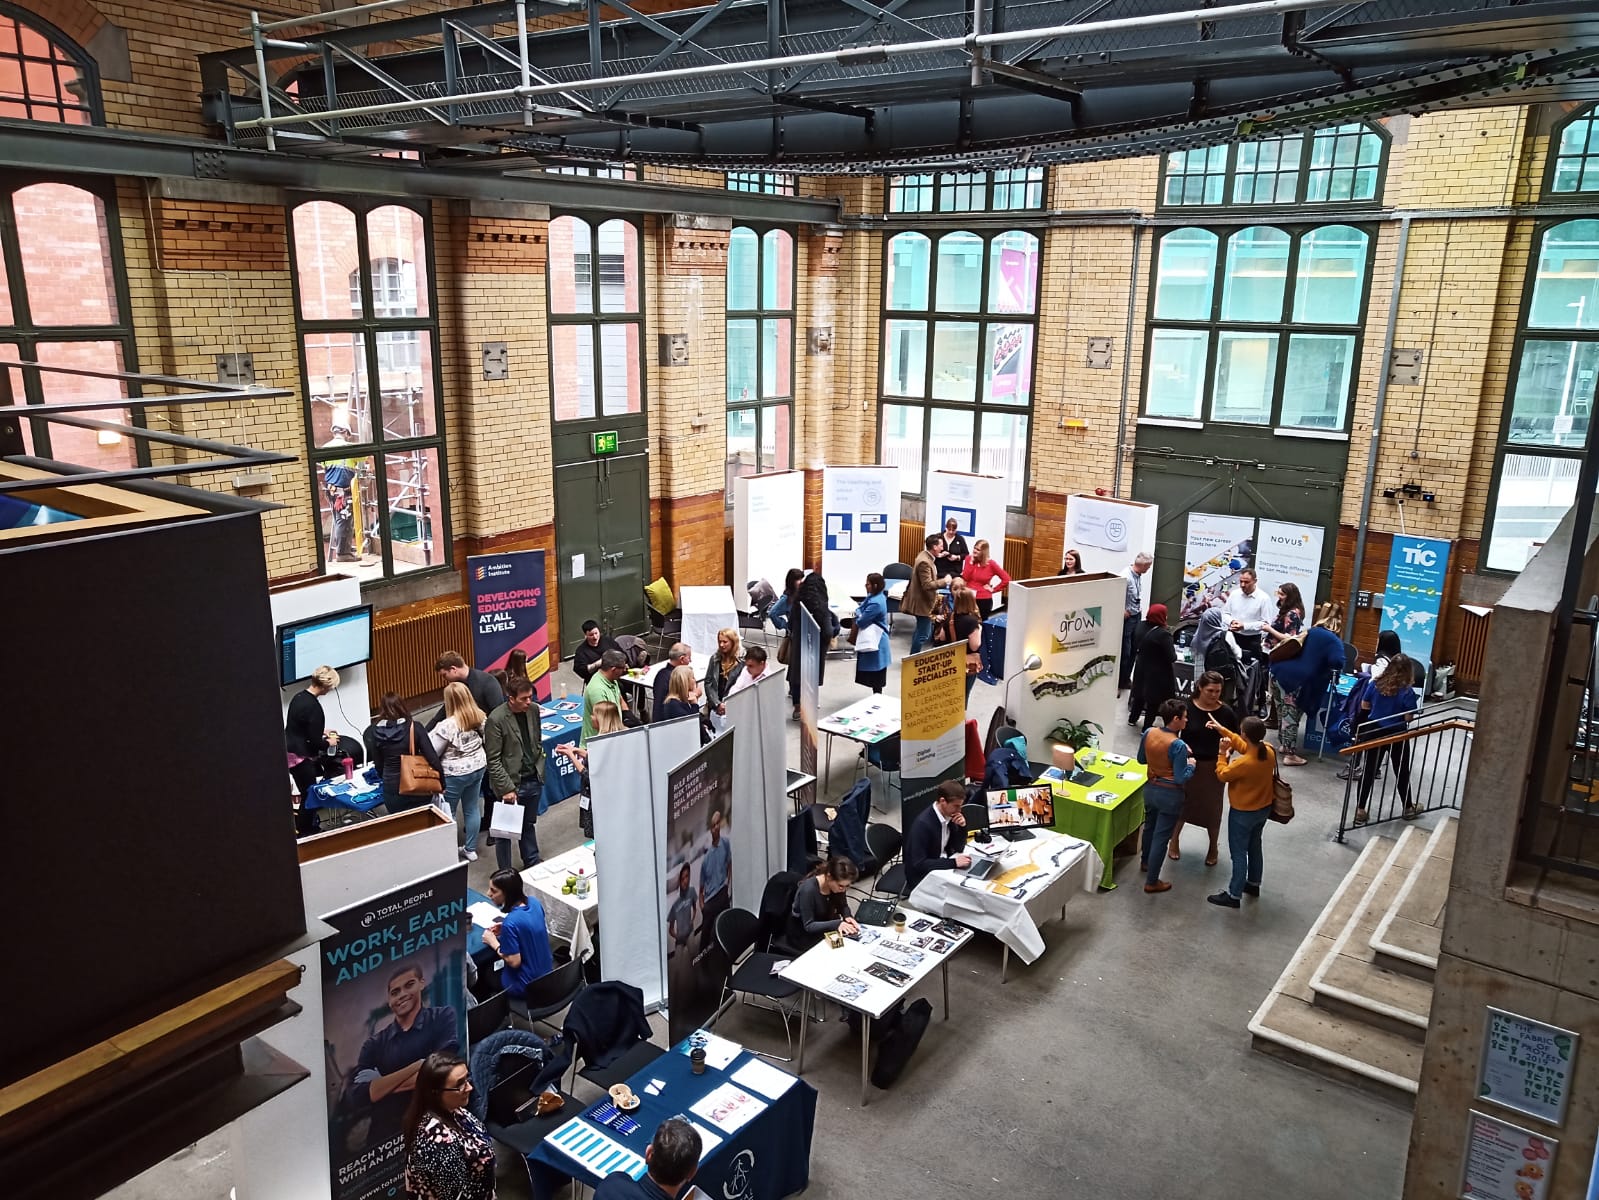 The Teacher Empowerment Event in Manchester in 2019, at The People's History Museum